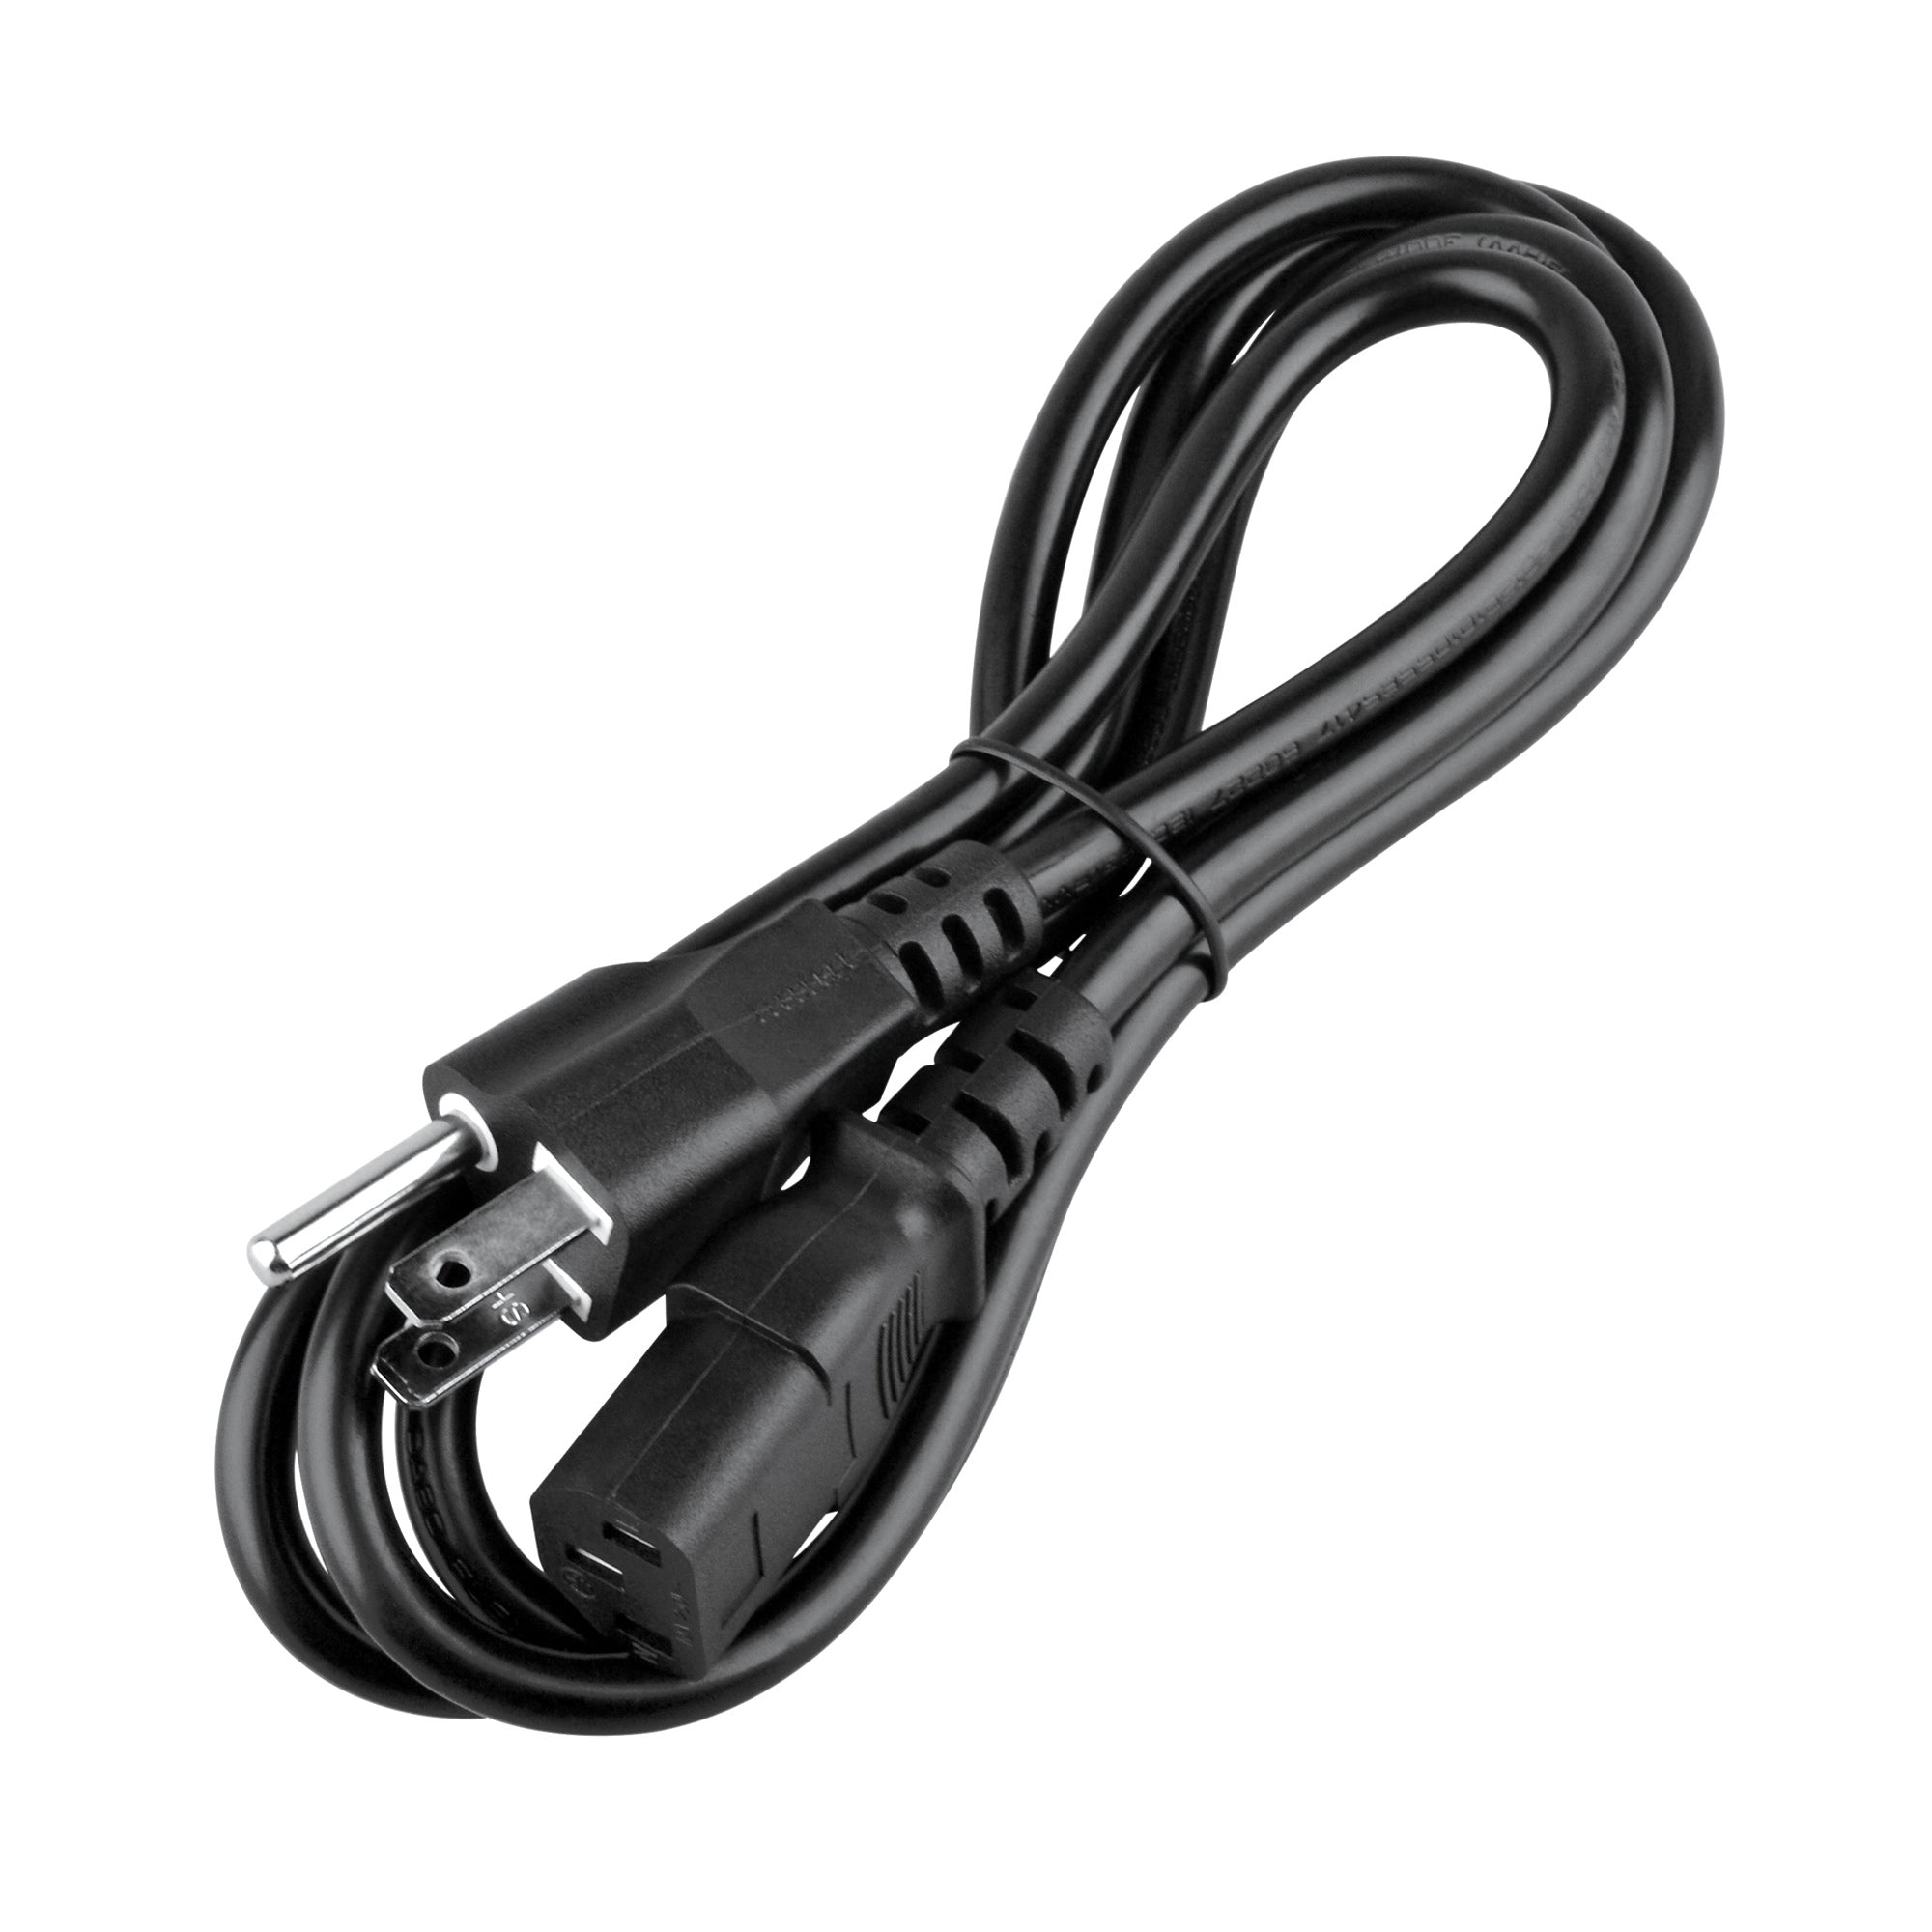 AbleGrid AC Power Cord Cable Plug Compatible with KORG MR2000S, KM-202 KM-402 D888 Dynamic DJ Mixer